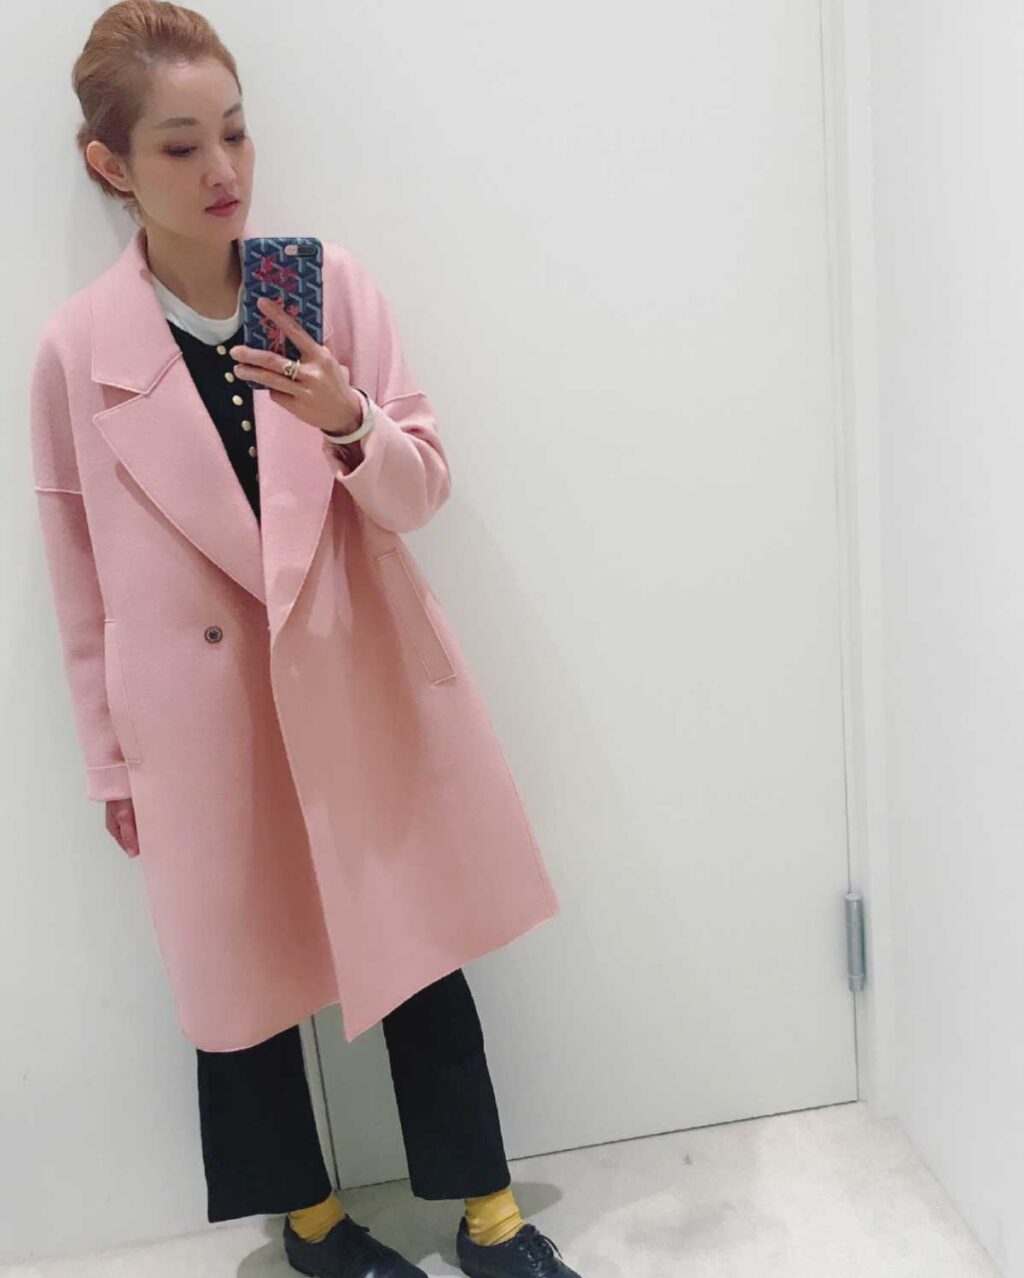 Coat: Knee-Length with an Oversized Collar